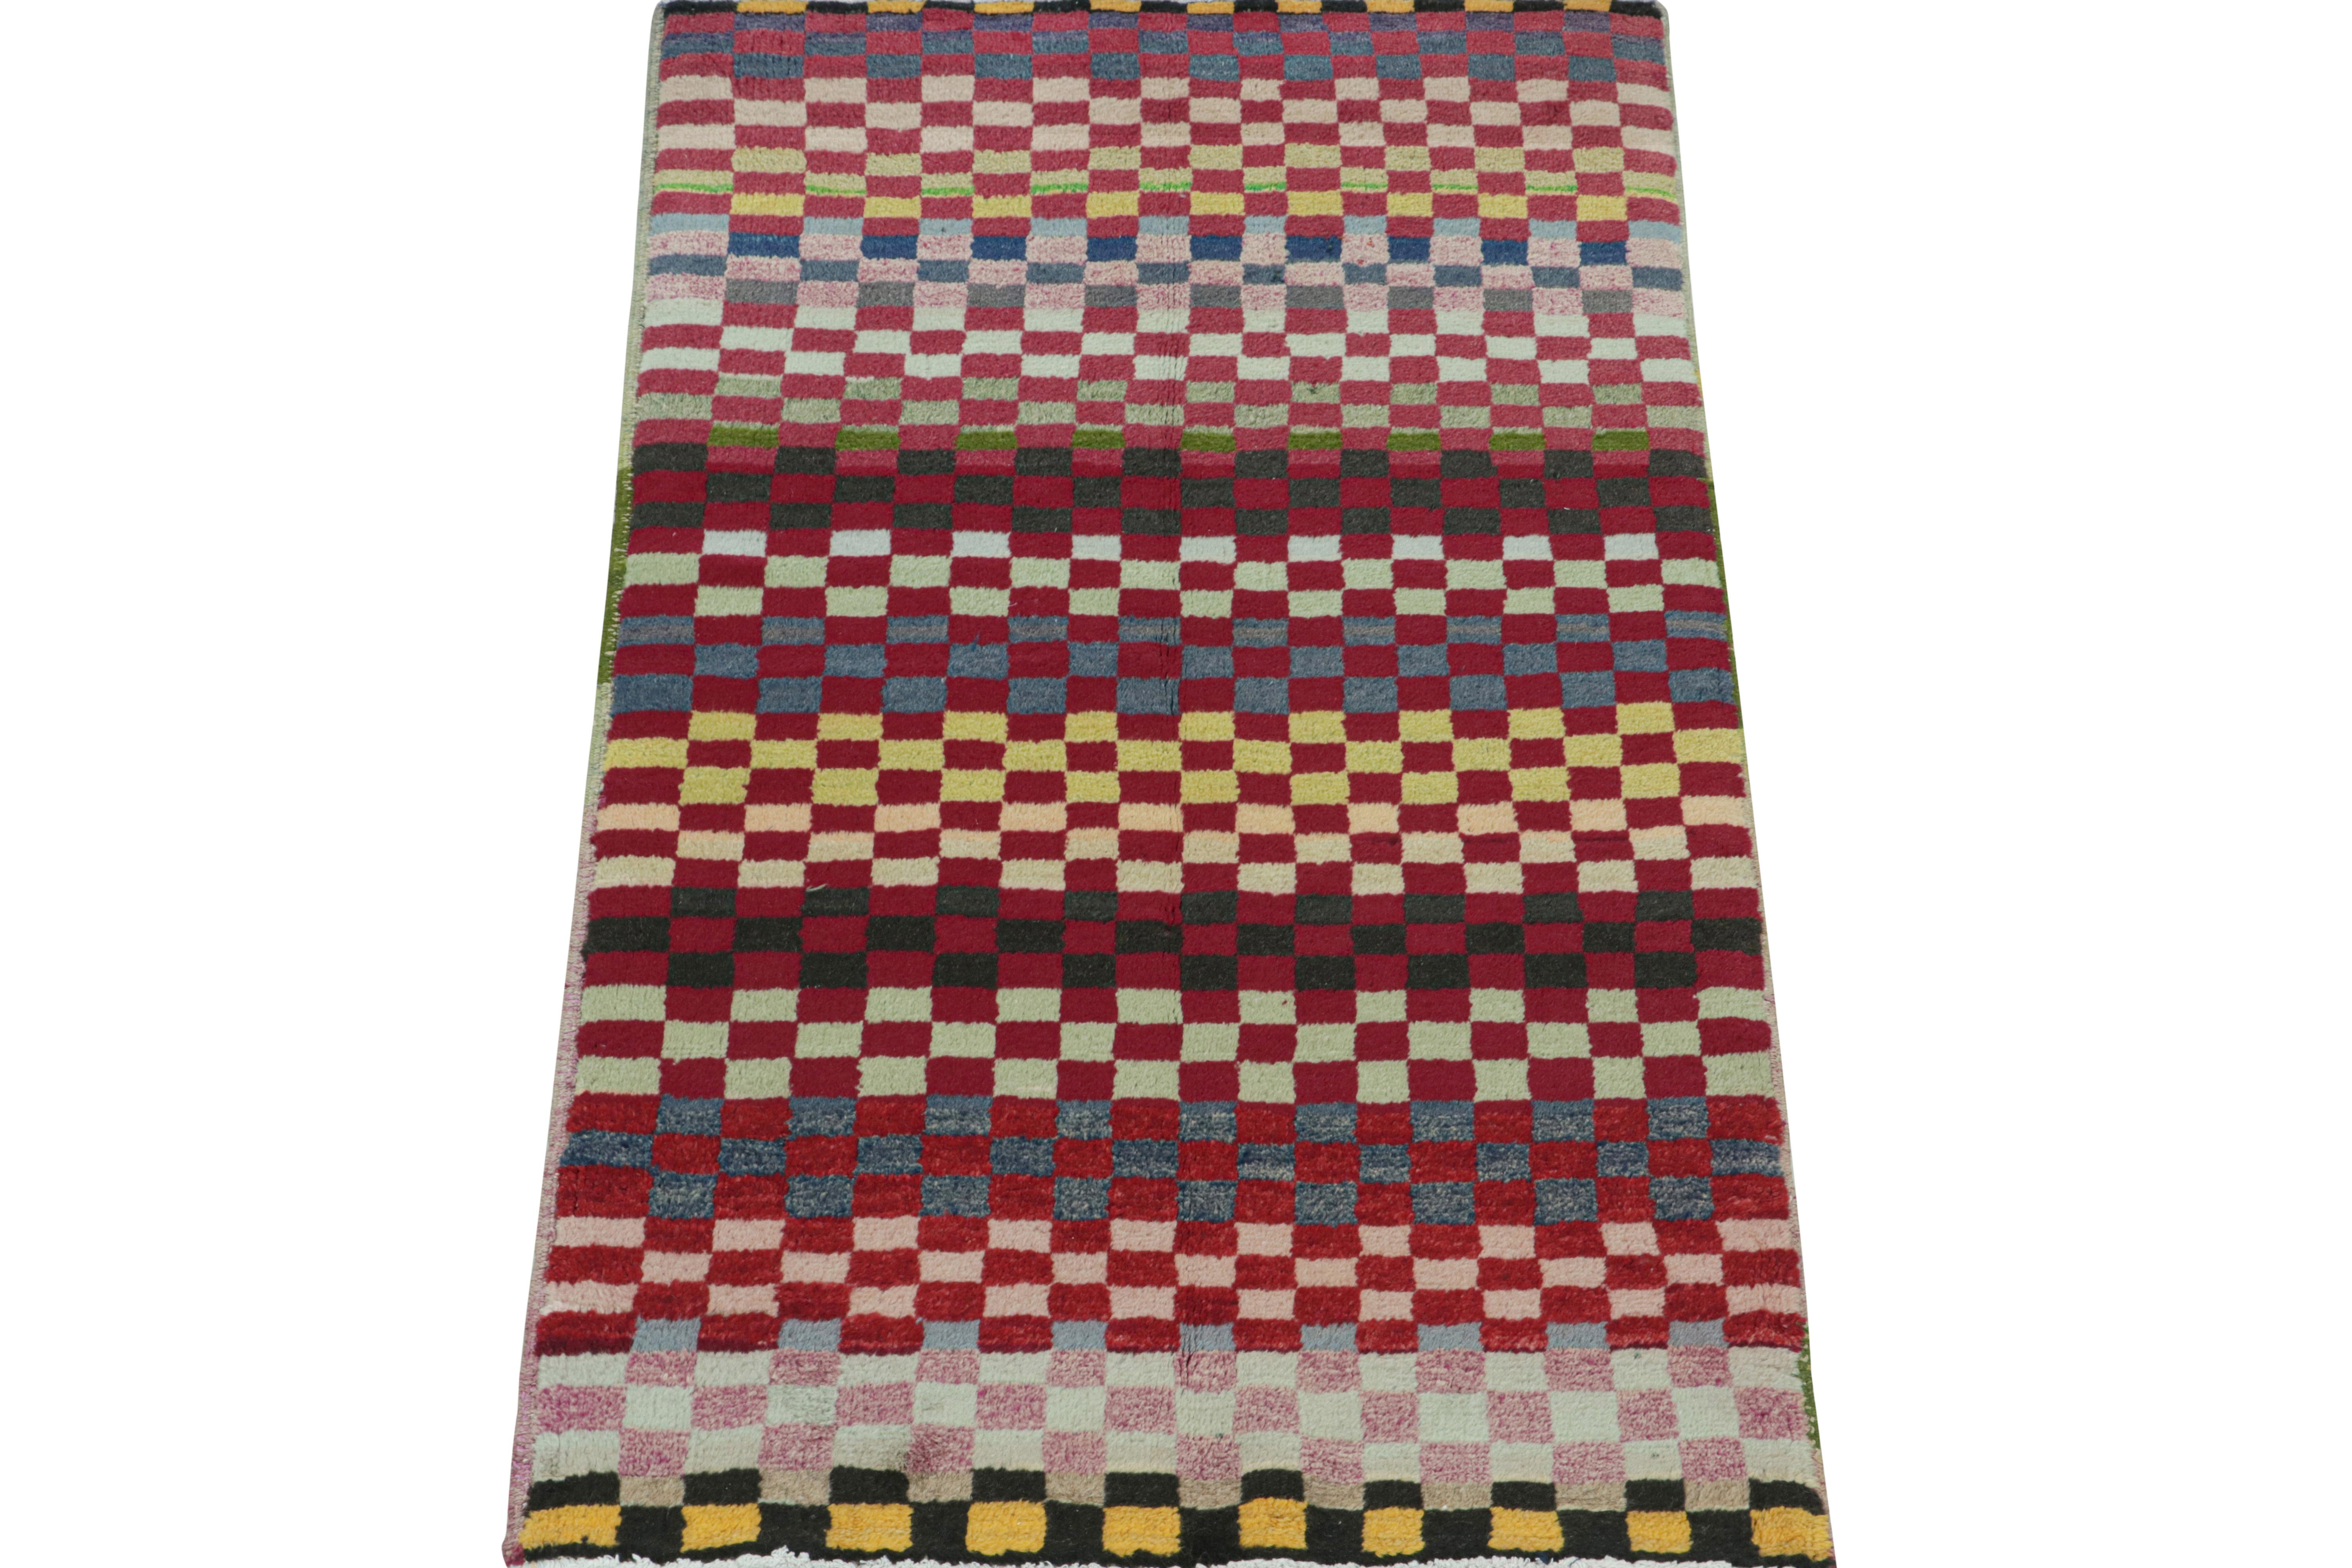 This vintage 3x6 runner is a new addition to Rug & Kilim’s Mid-Century Pasha Collection. This line is a commemoration, with rare curations we believe to hail from multidisciplinary Turkish designer Zeki Müren.

Hand-knotted in wool circa 1960-1970,